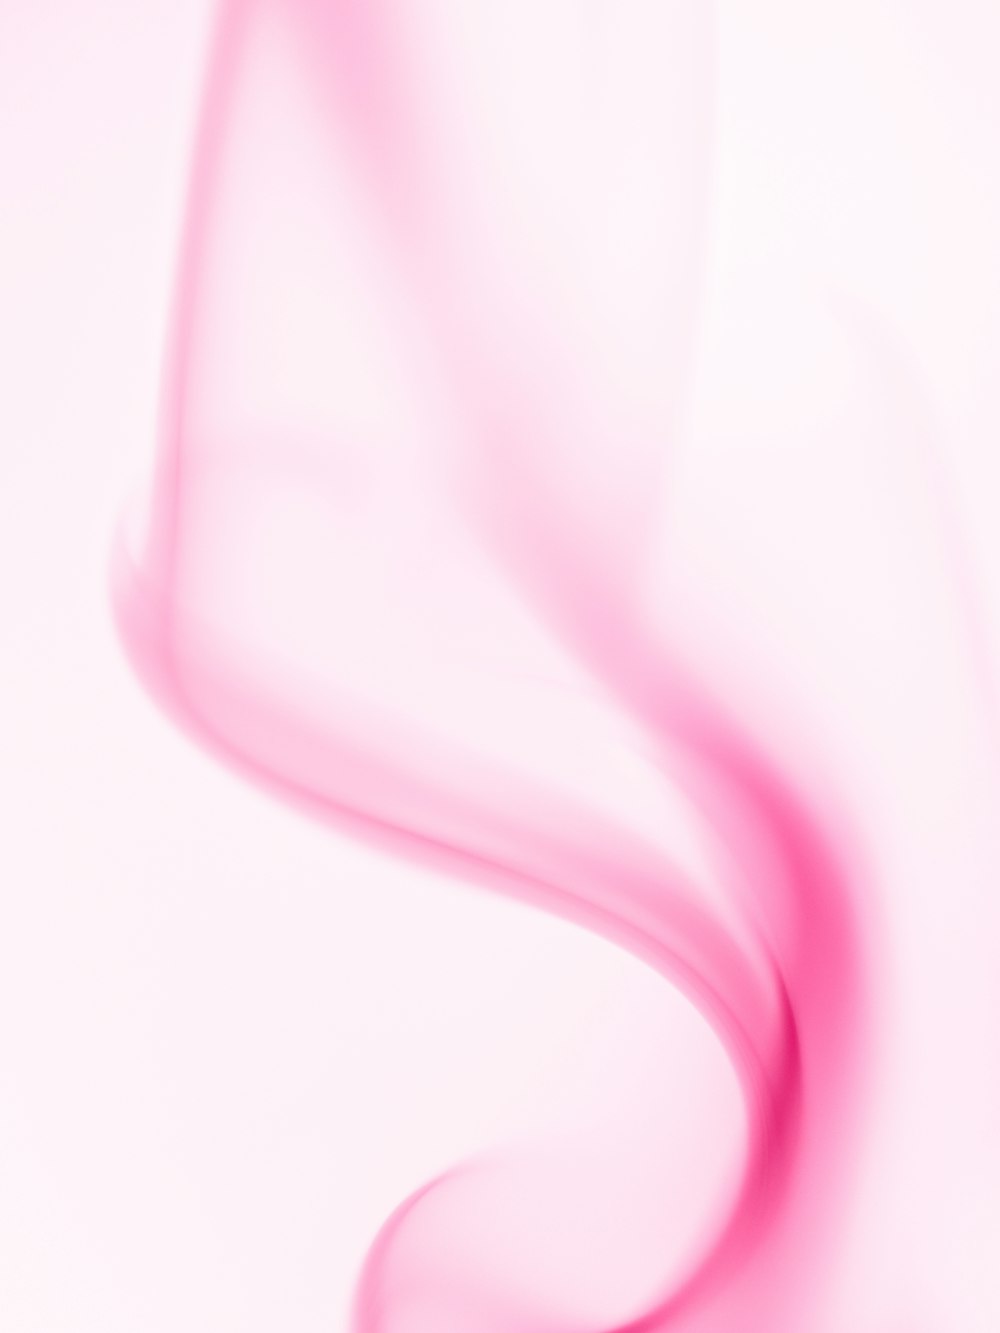 a blurry photo of a white and pink background